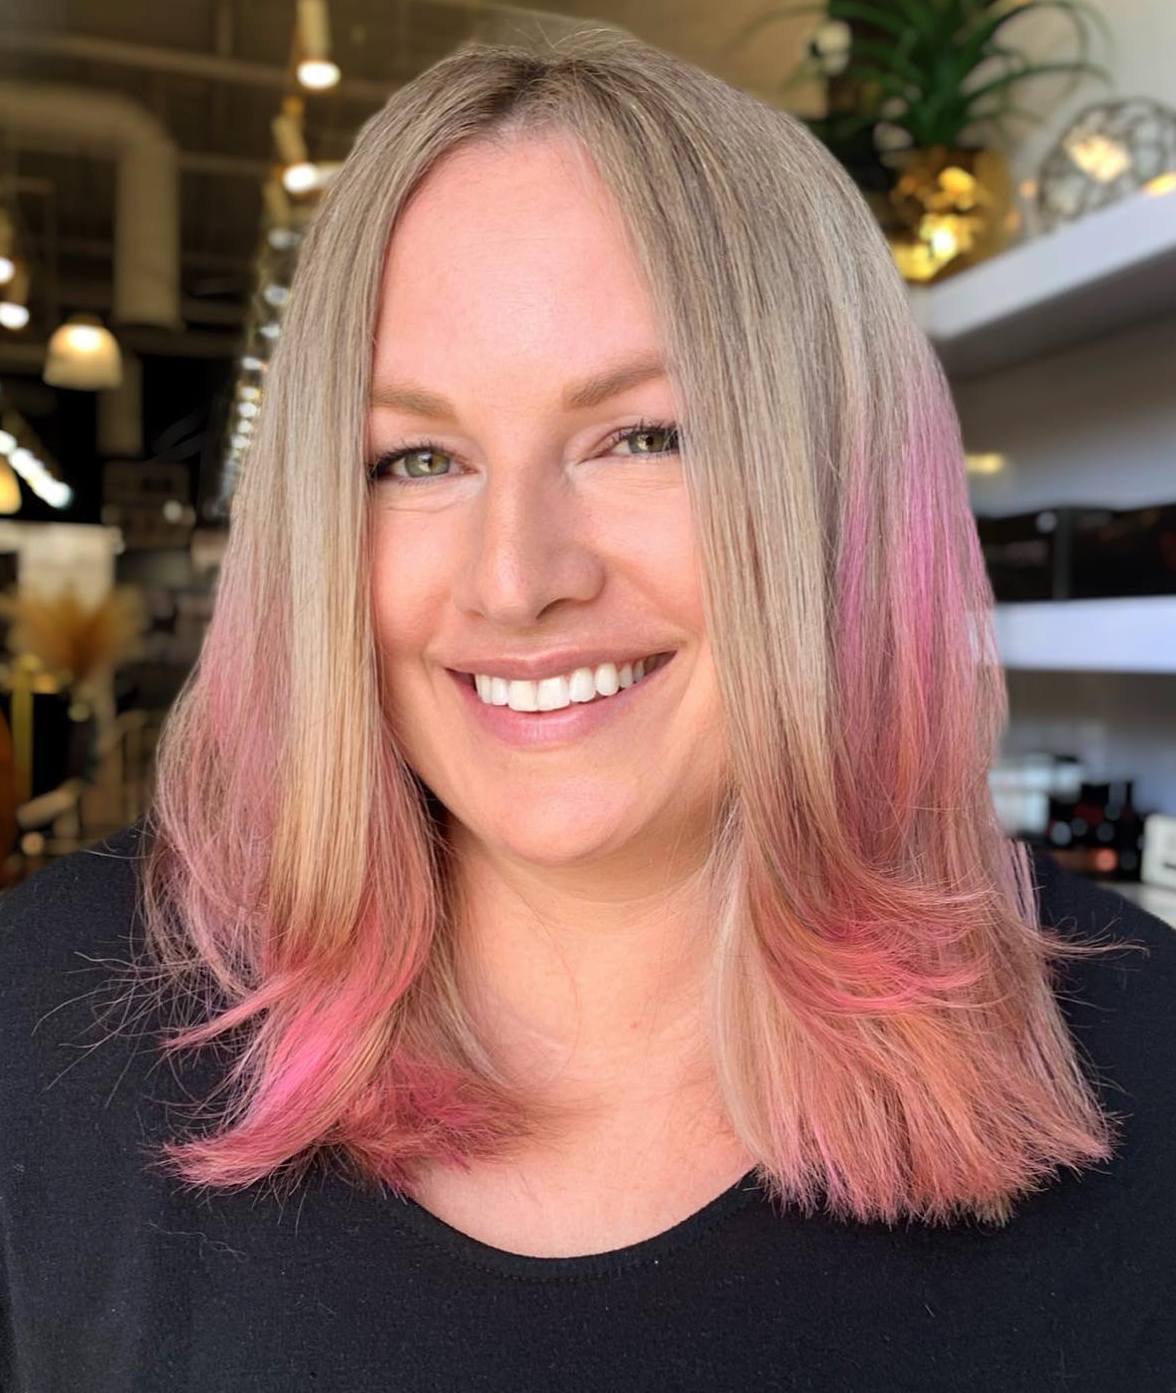 Blonde to Rose Gold Ombre on Short Haircut